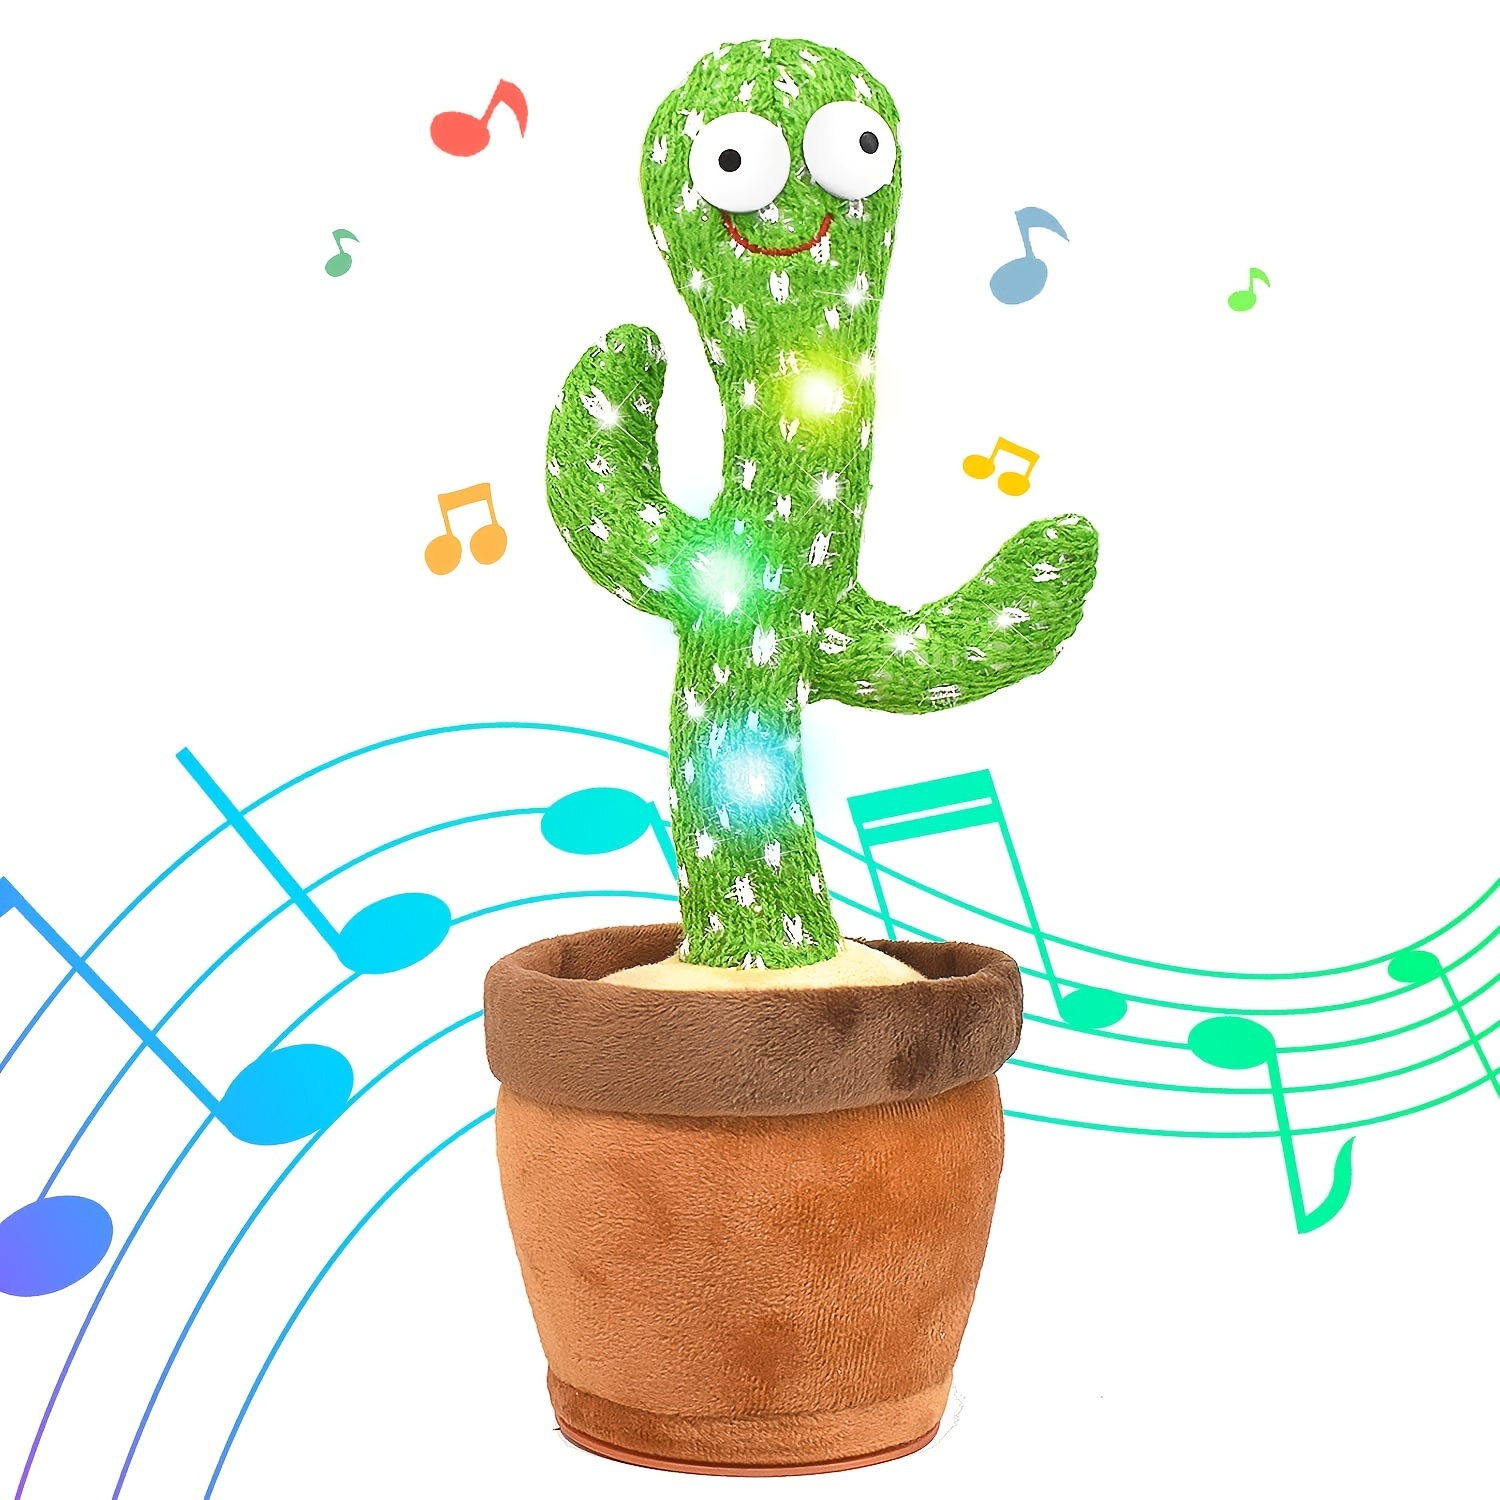 

Dancing Cactus Talking Cactus Baby Toys, Wriggle Singing Cactus Repeats What You Say Baby Boy Toys, Plush Electric Speaking Cactus 15 Second Voice Recorder Baby Girl Toy Halloween/christmas Gift